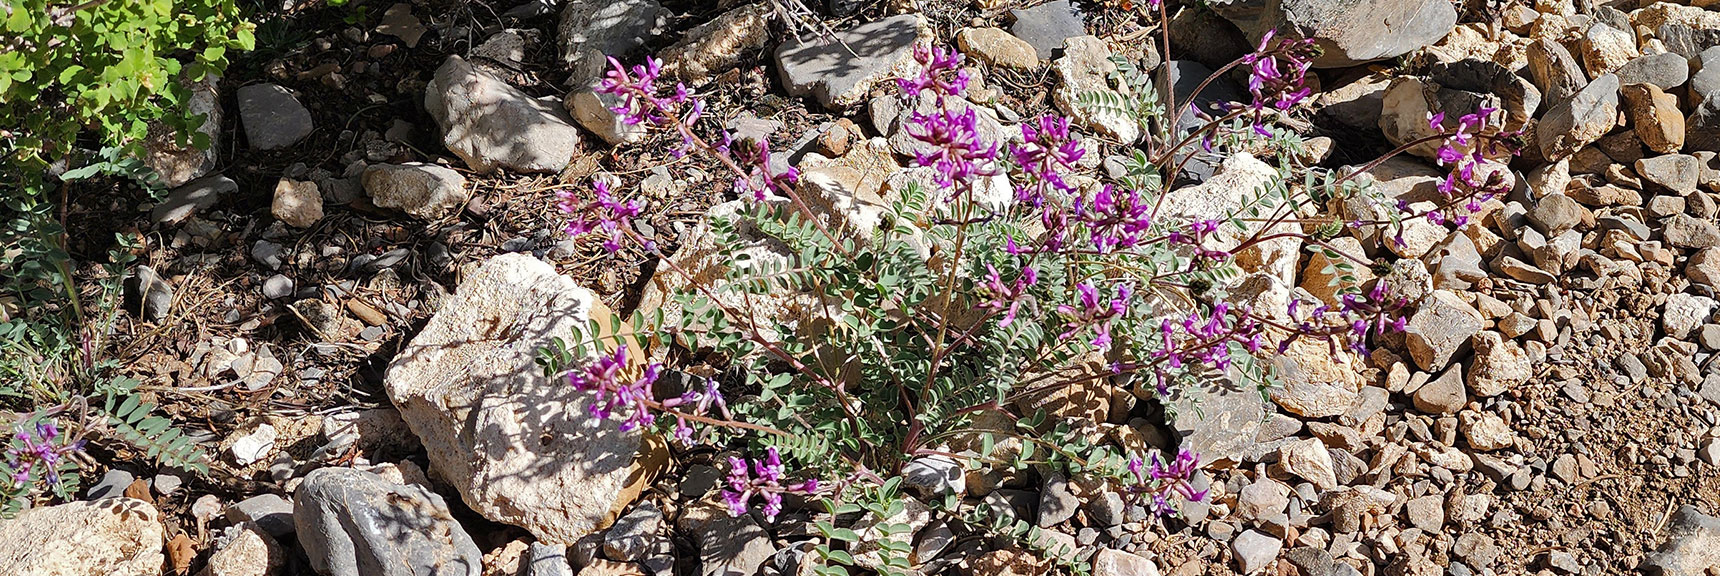 Collecting Now, Will Identify Later | Flowers Above 5000ft | LasVegasAreaTrails.com | Southwestern US | Eagle's Nest Loop, Kyle Canyon, Nevada